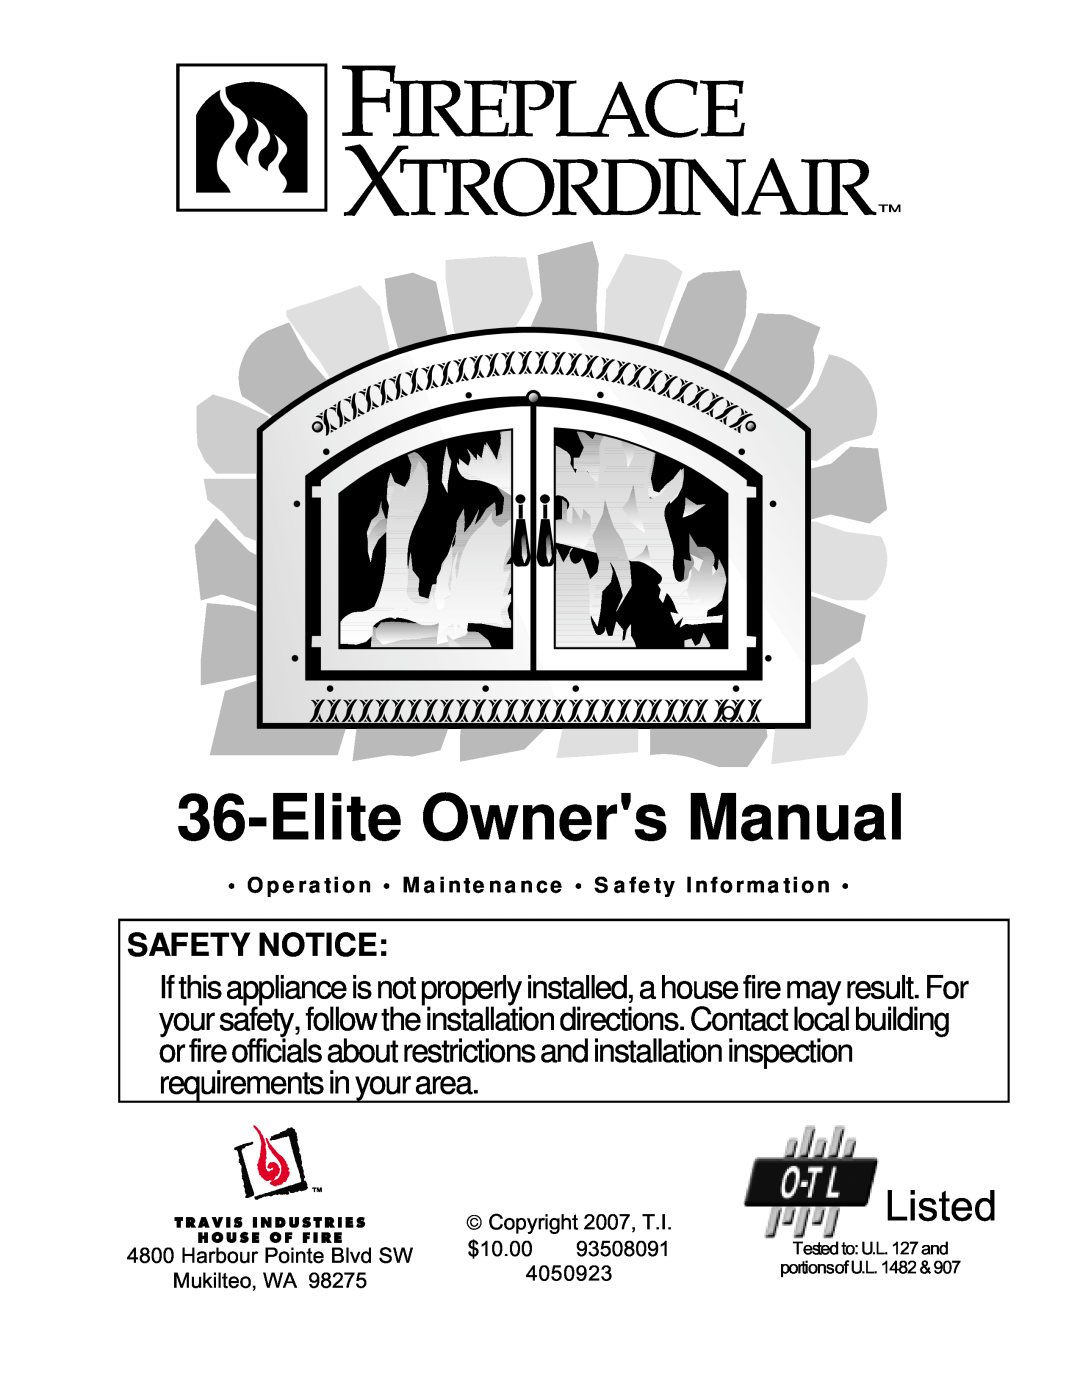 FireplaceXtrordinair 36-Elite owner manual Listed, Safety Notice 